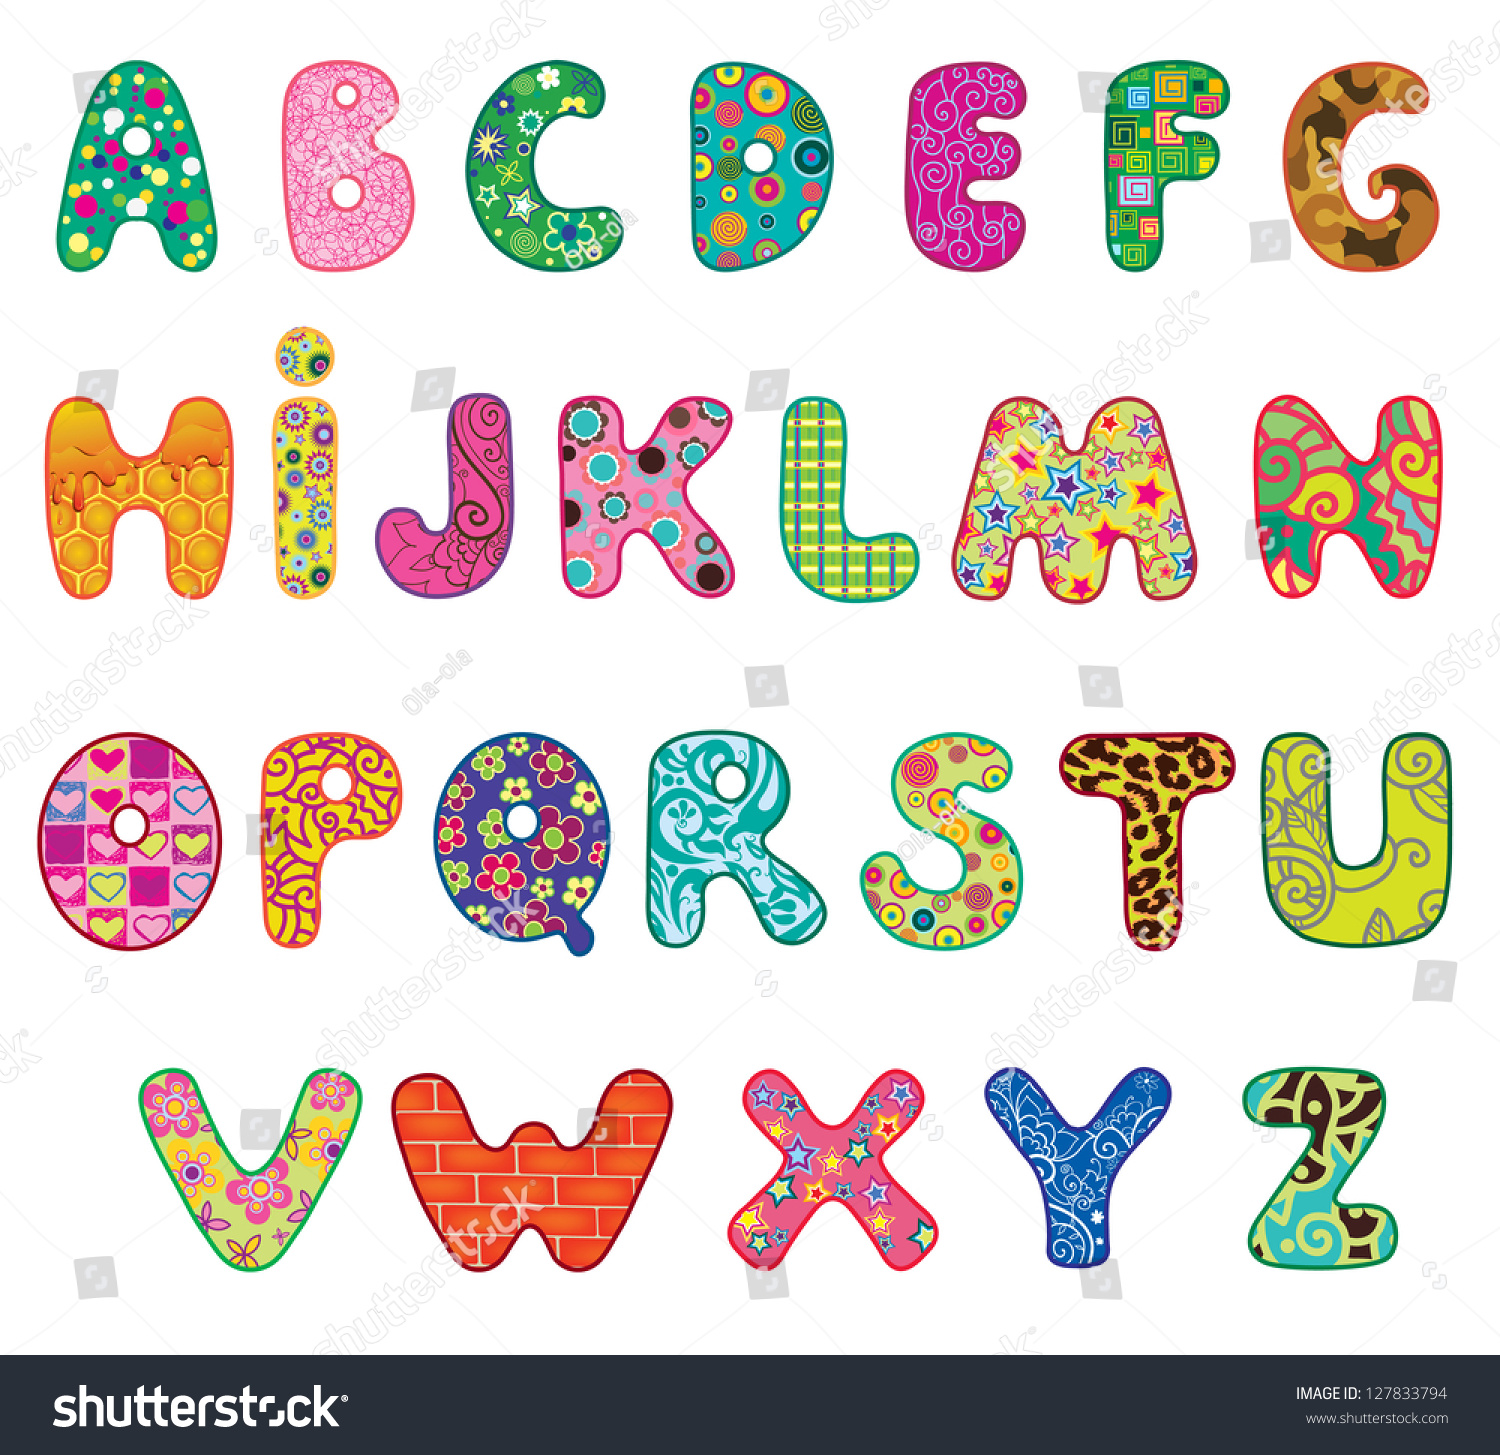 Cute Colored Textured Alphabet Letters Made Stock Illustration 127833794